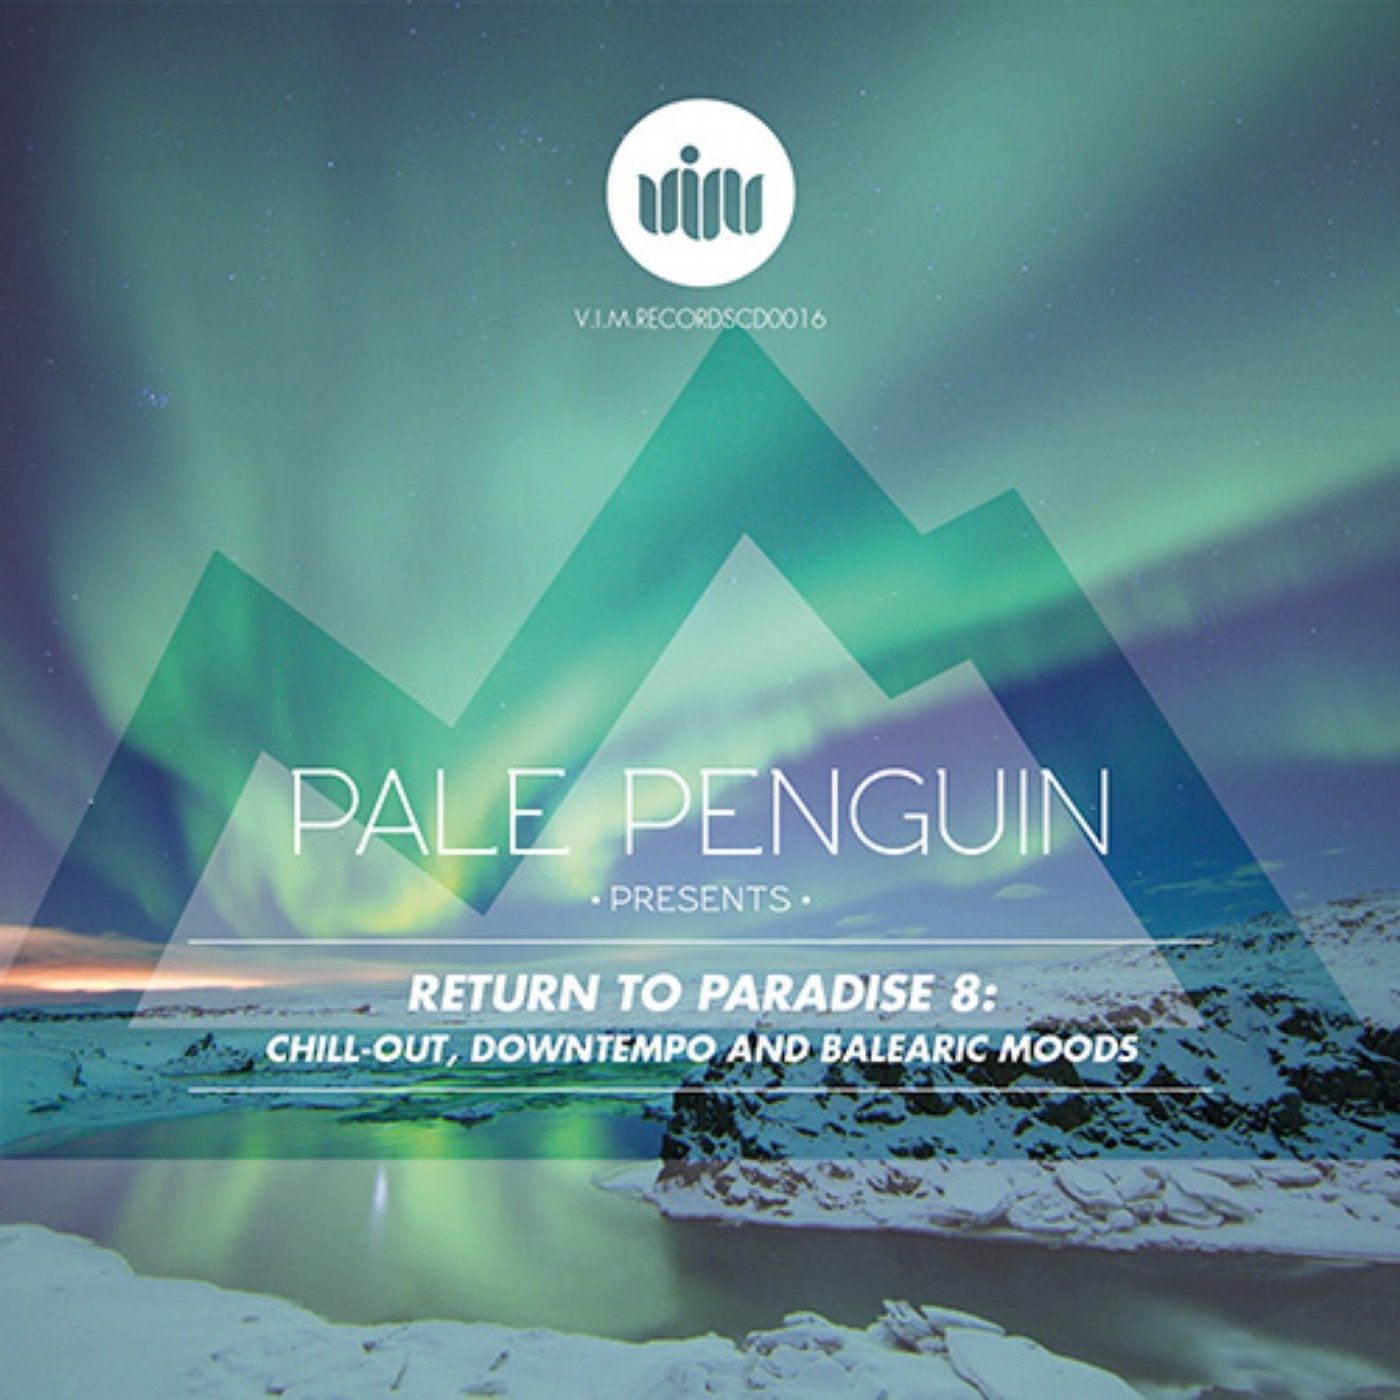 PALE PENGUIN Presents RETURN TO PARADISE 8: CILL-OUT, DOWNTEMPO AND BALEARIC MOODS